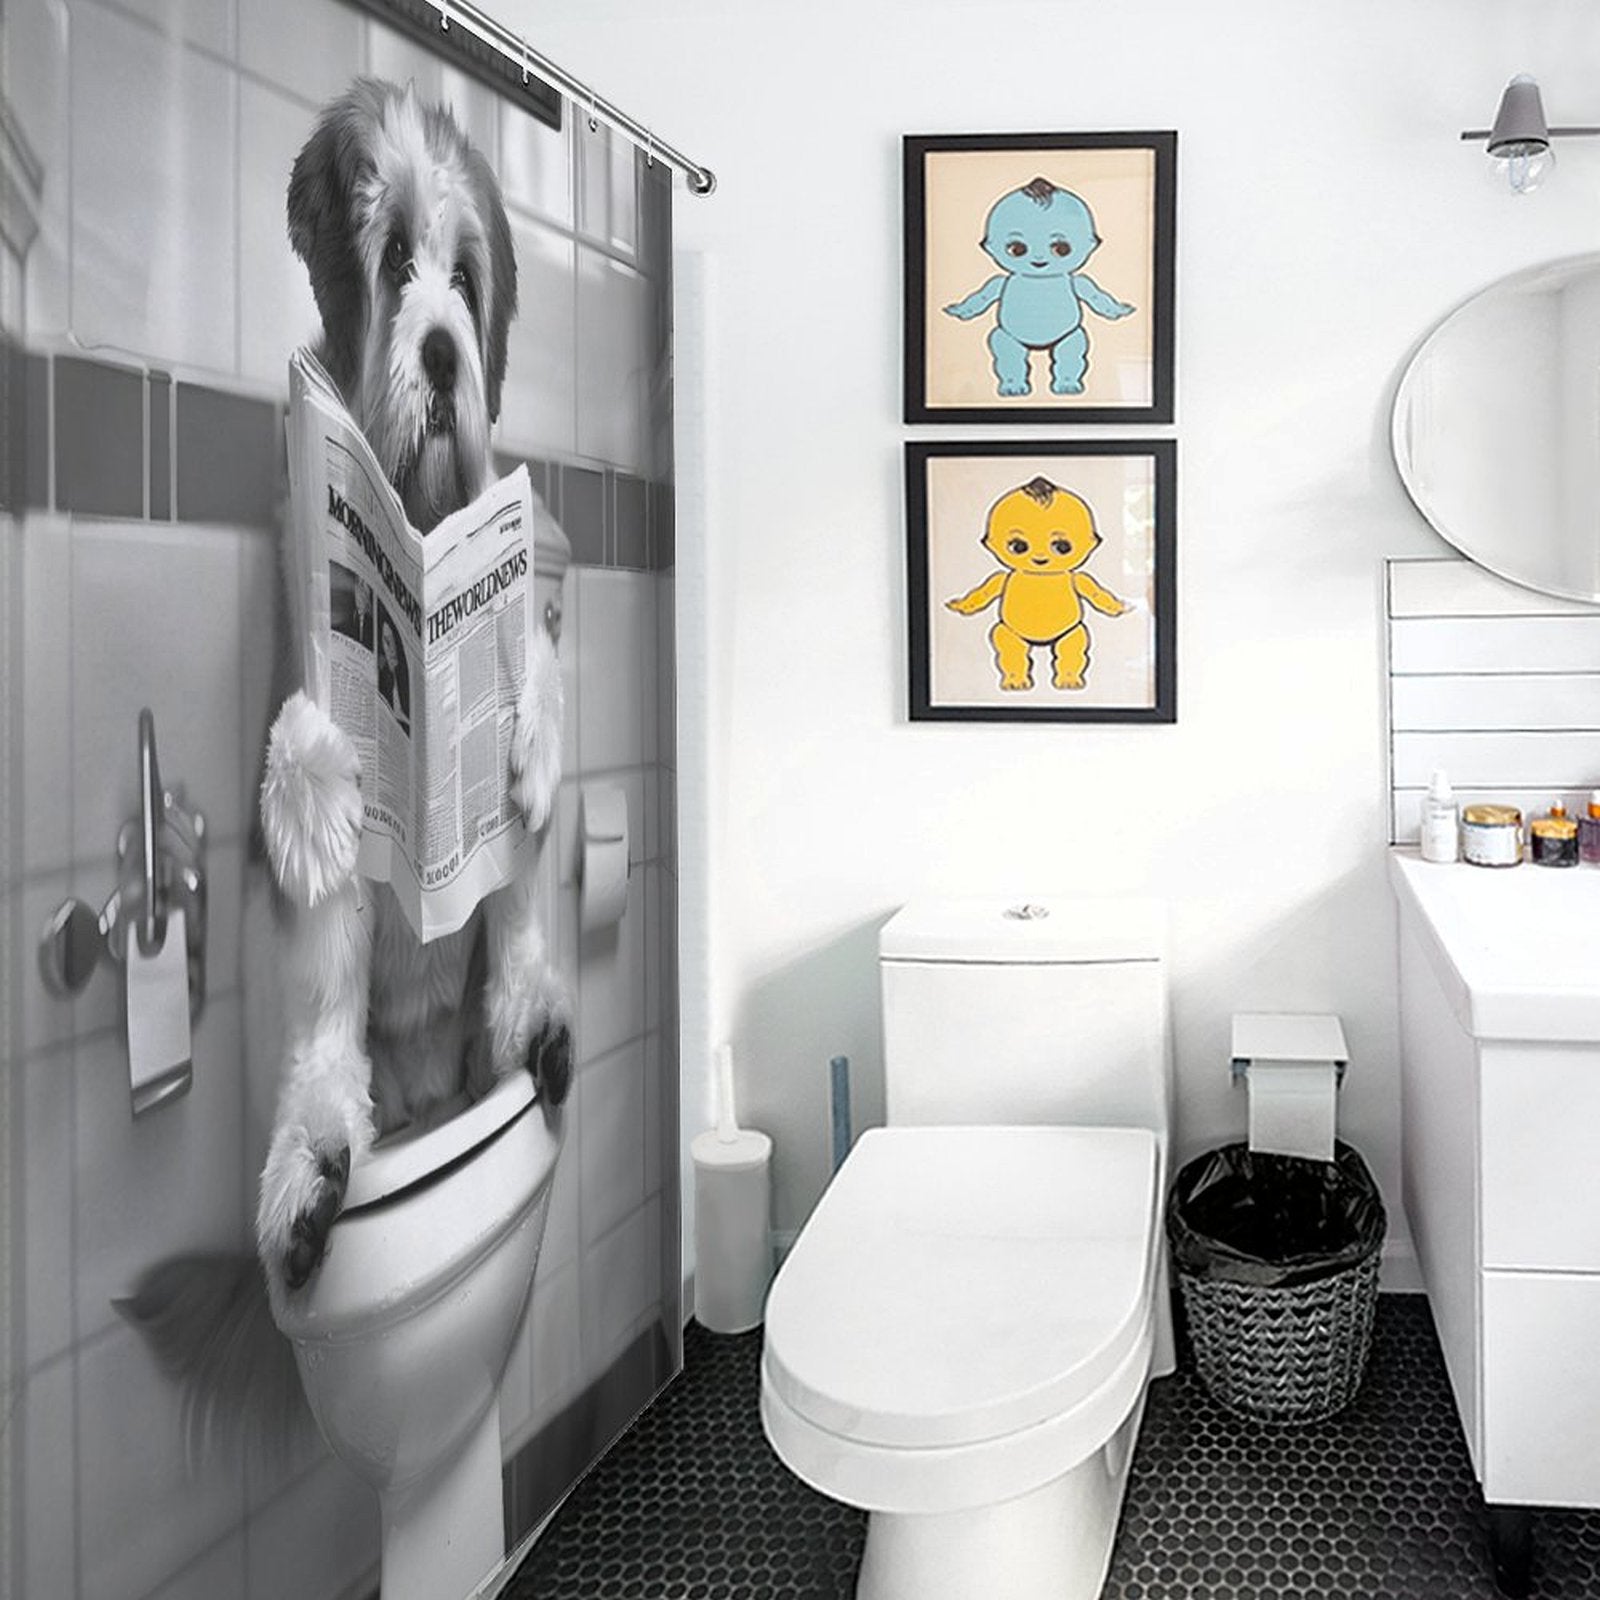 Bathroom with a Cotton Cat Balck and White Funny Read Book Dog Shower Curtain-Cottoncat, depicting a dog reading a newspaper on the toilet. Features toilet, sink, mirror, and framed art of colorful characters on the wall.